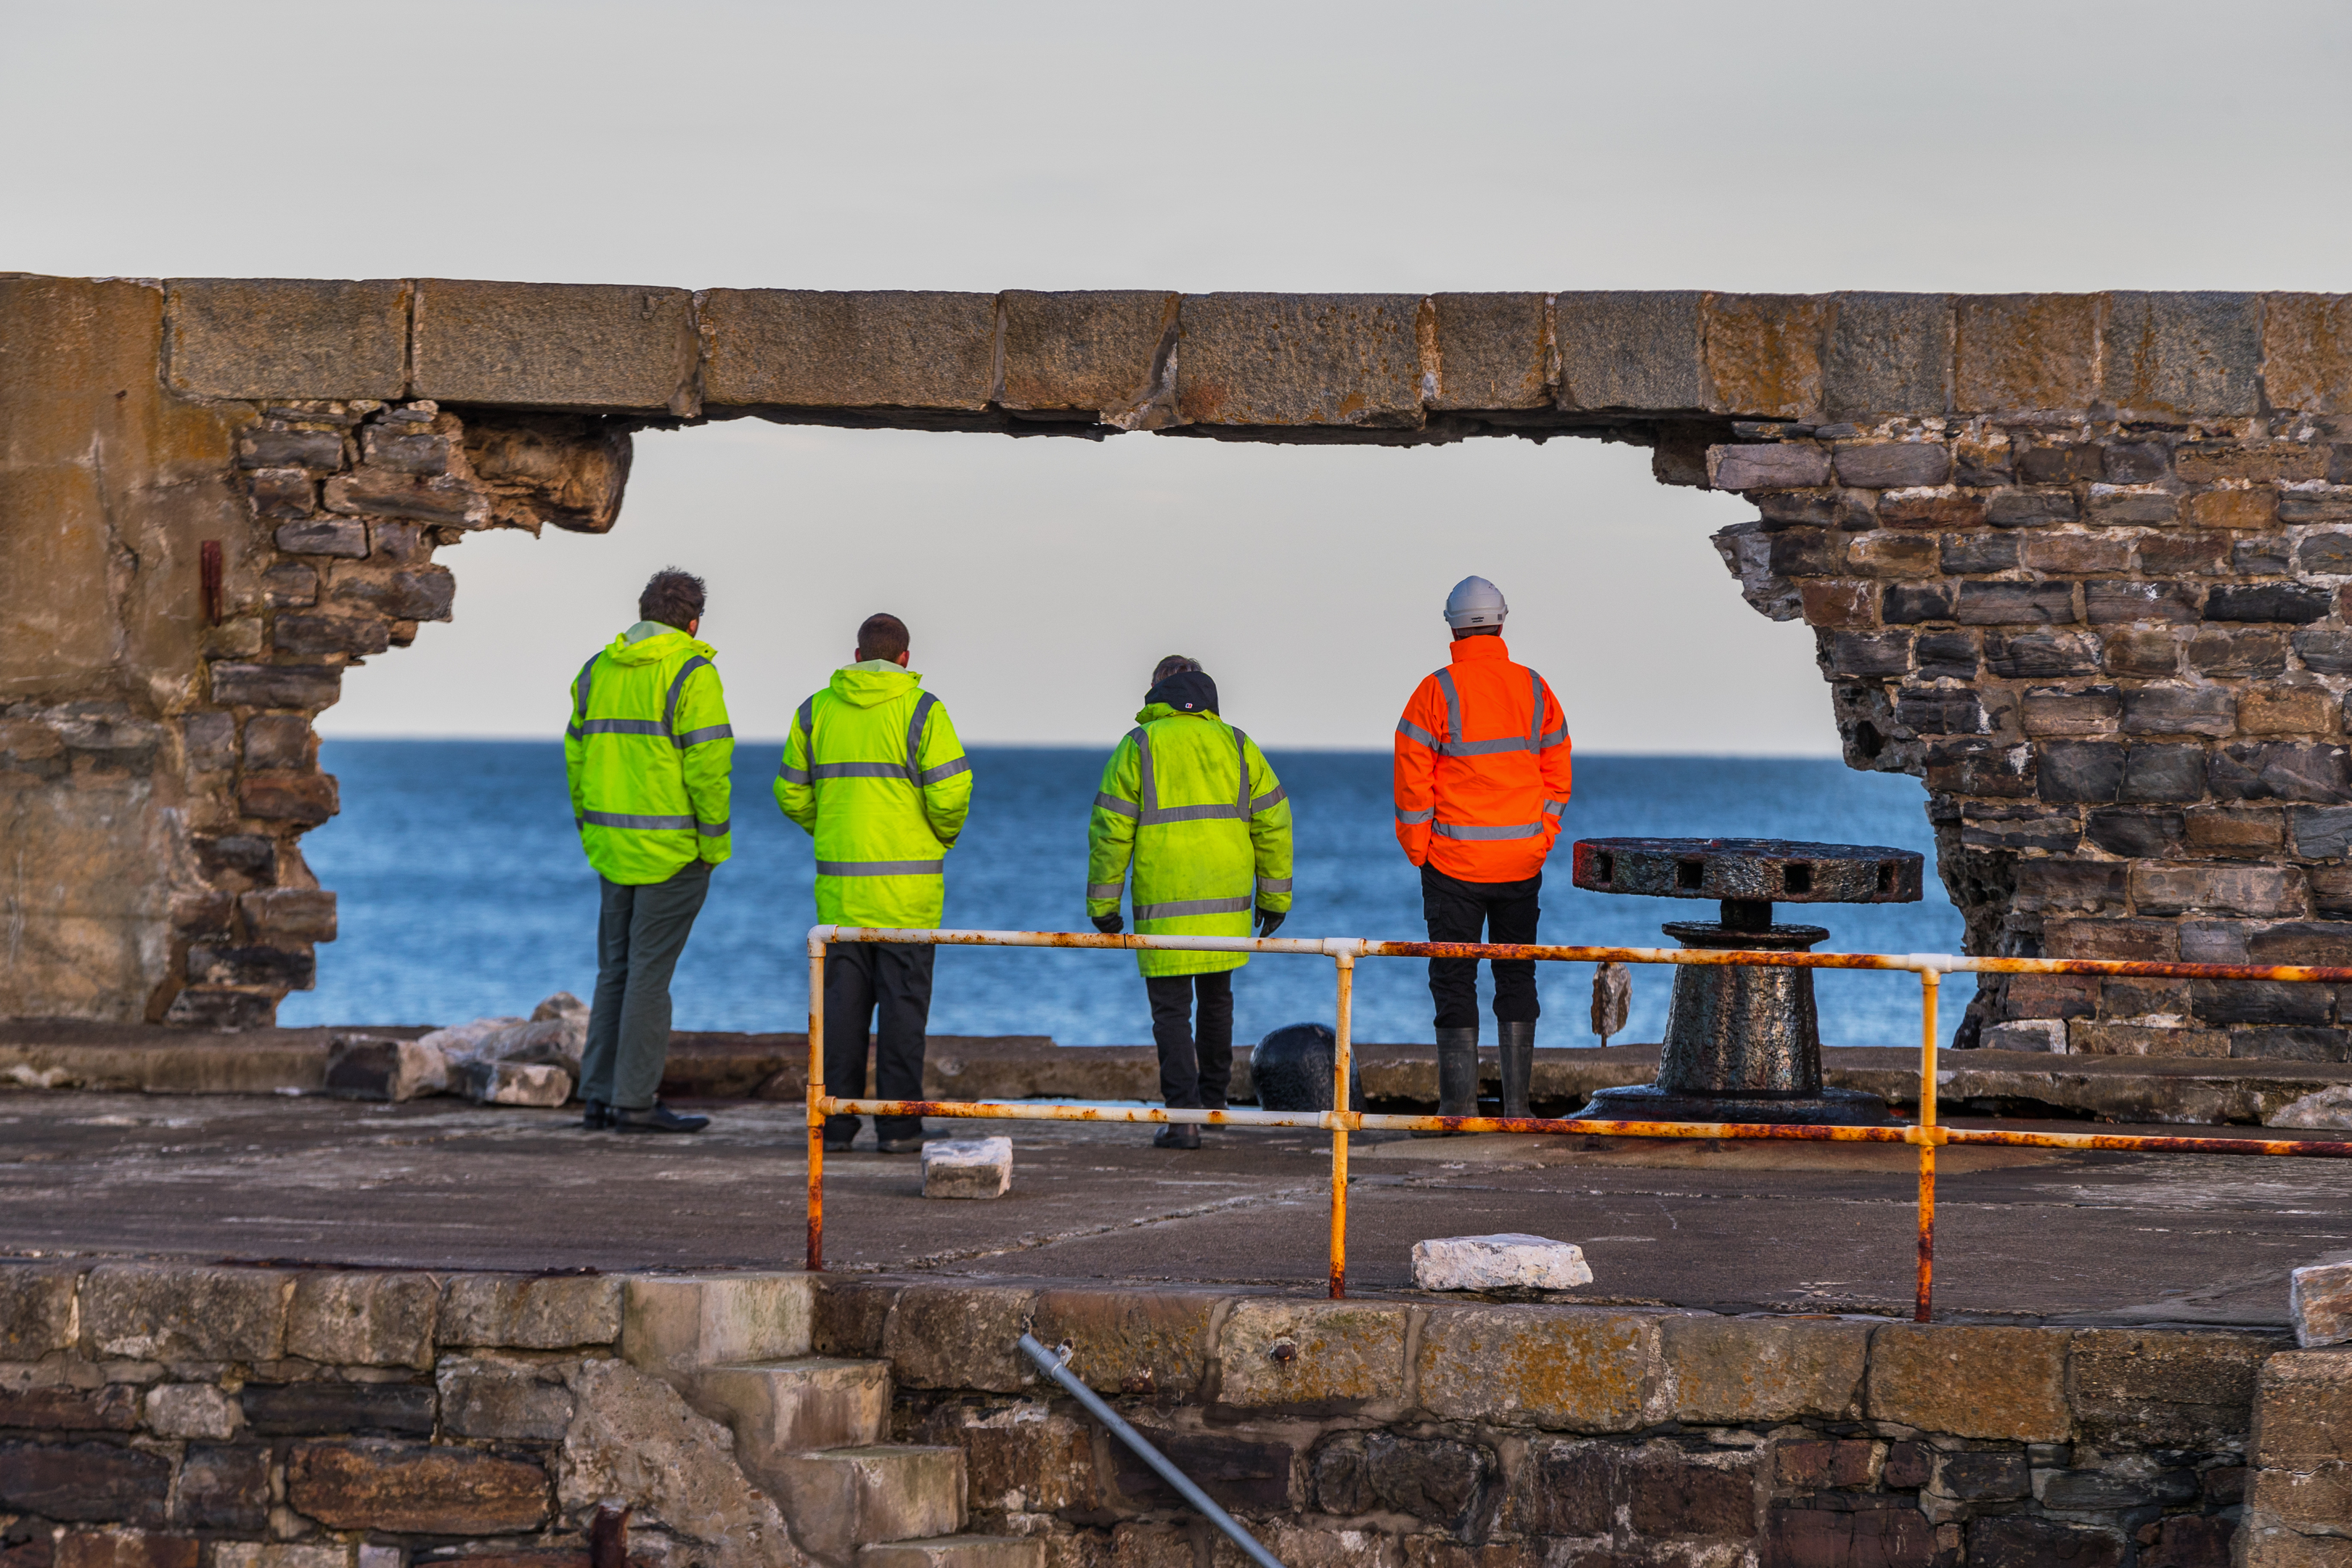 Moray council engineers inspected the damage yesterday